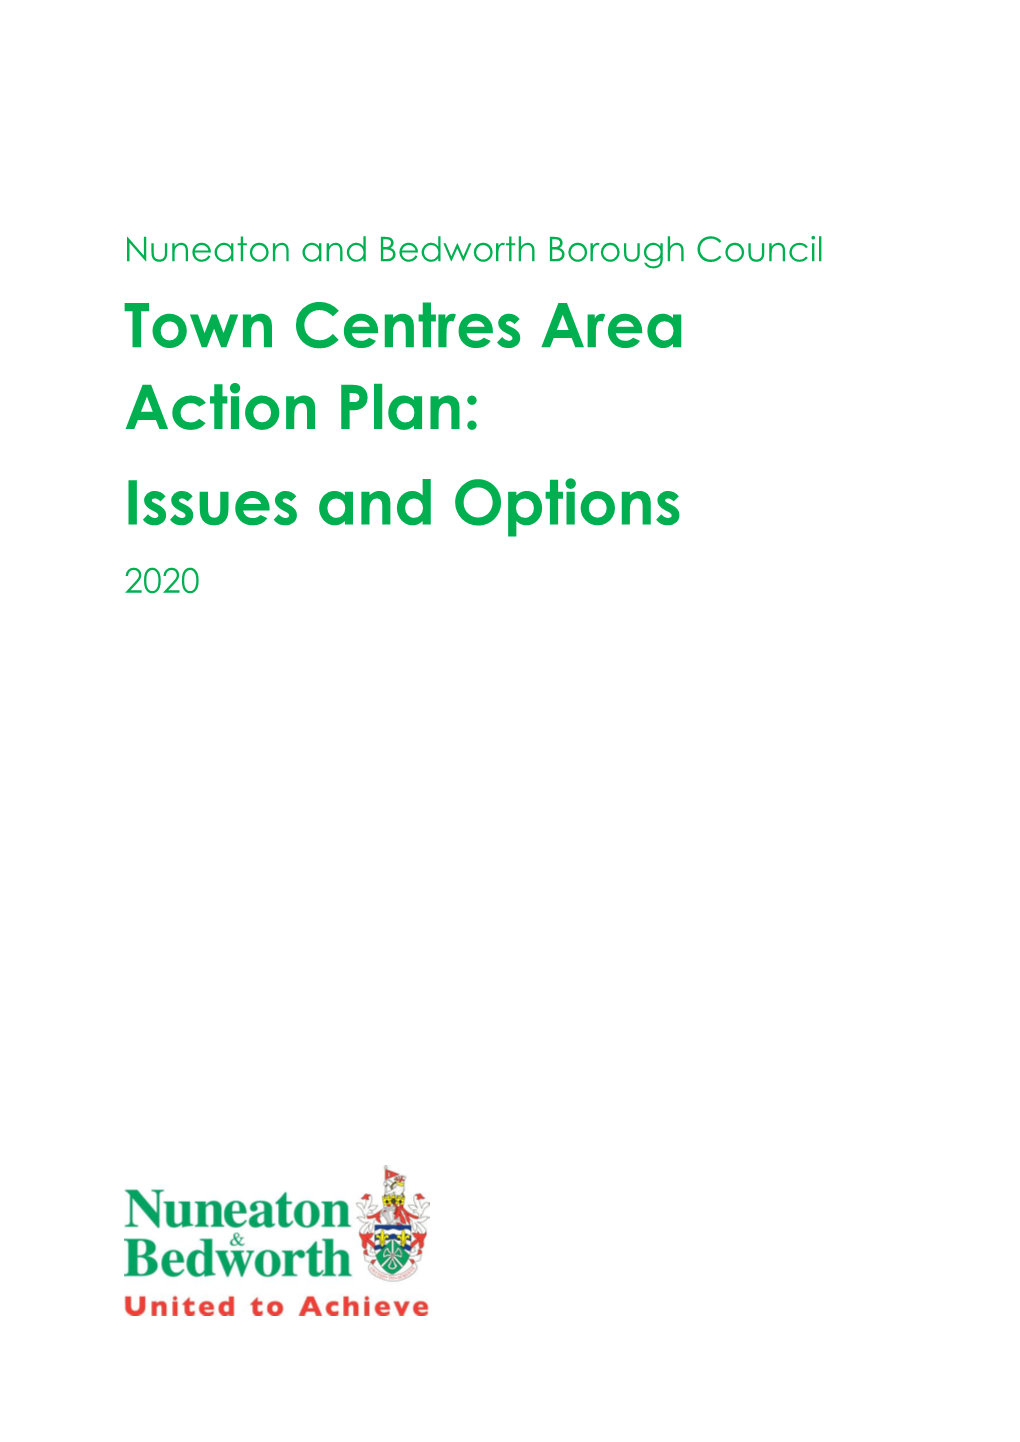 Town Centres Area Action Plan: Issues and Options 2020